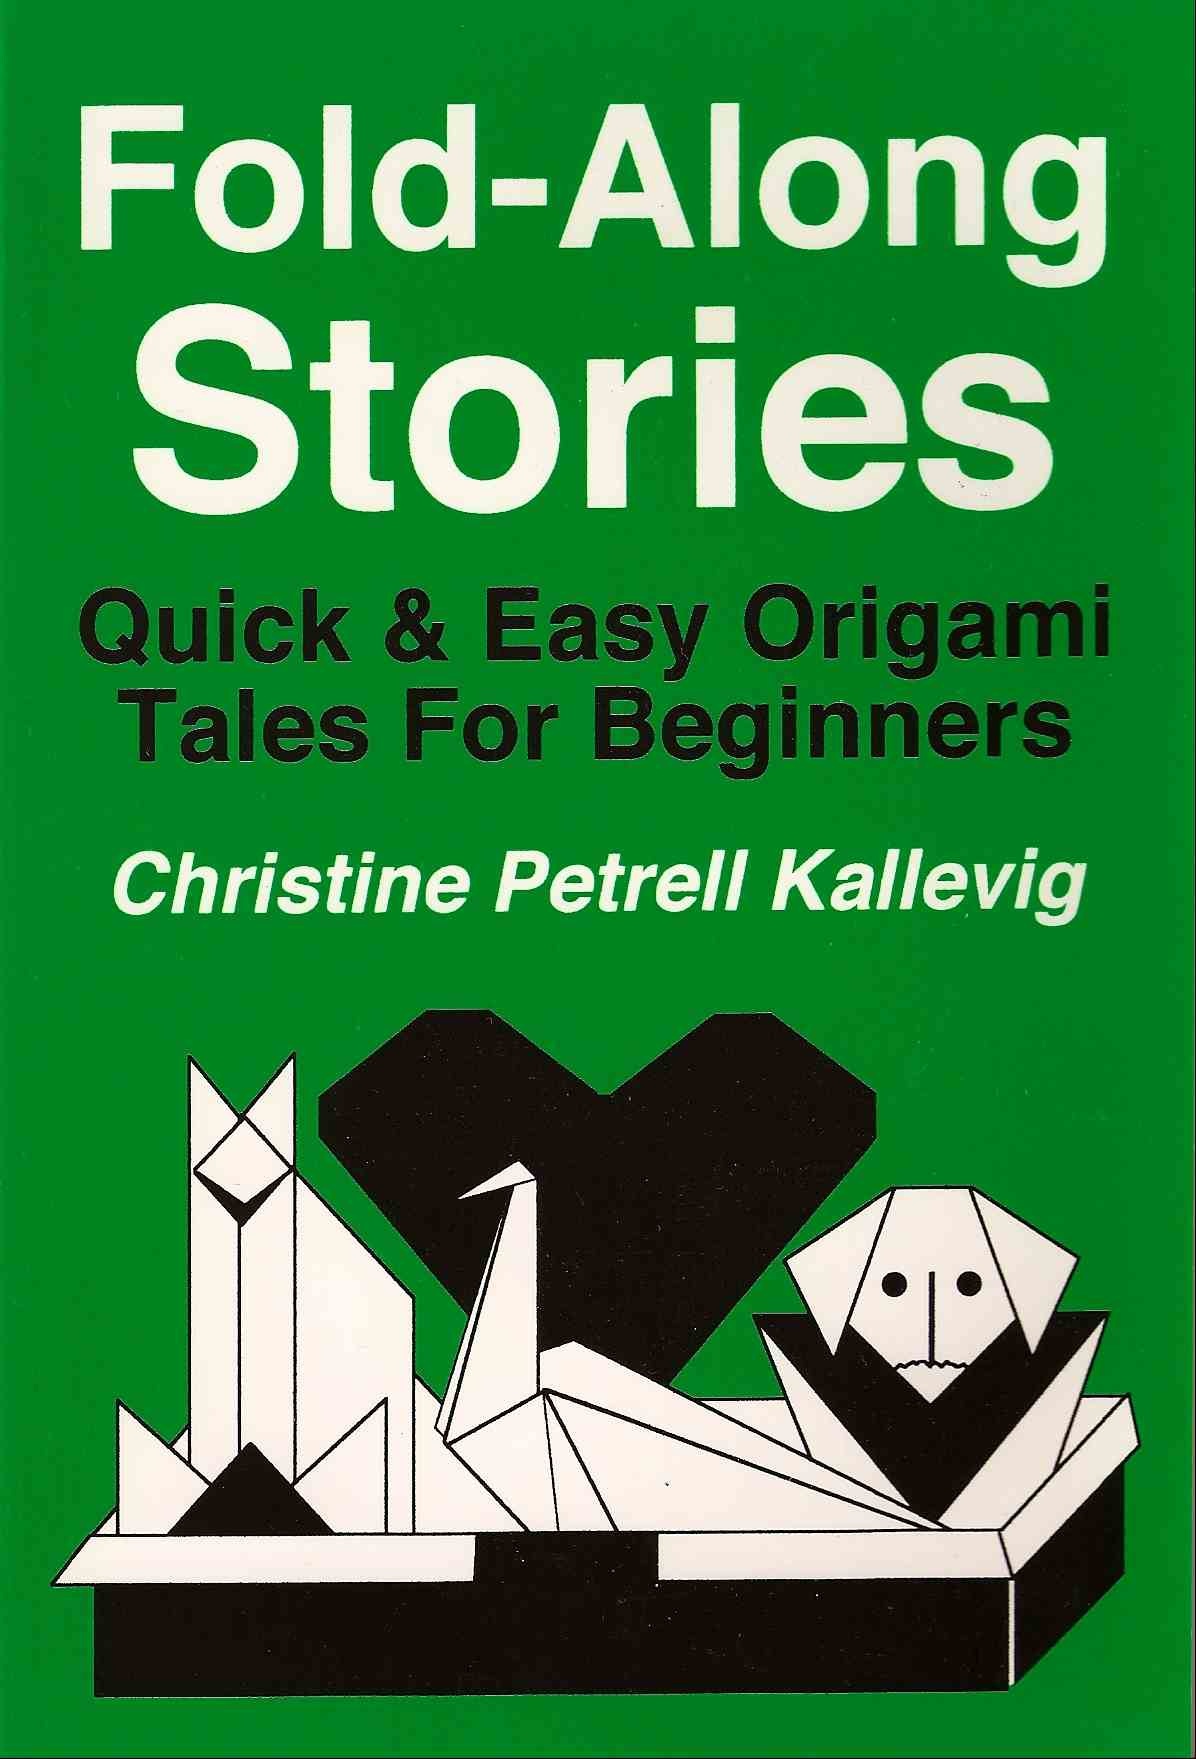 Storigami book Fold Along Stories Quick and Easy Origami Tales for Beginners by Christine Petrell Kallevig